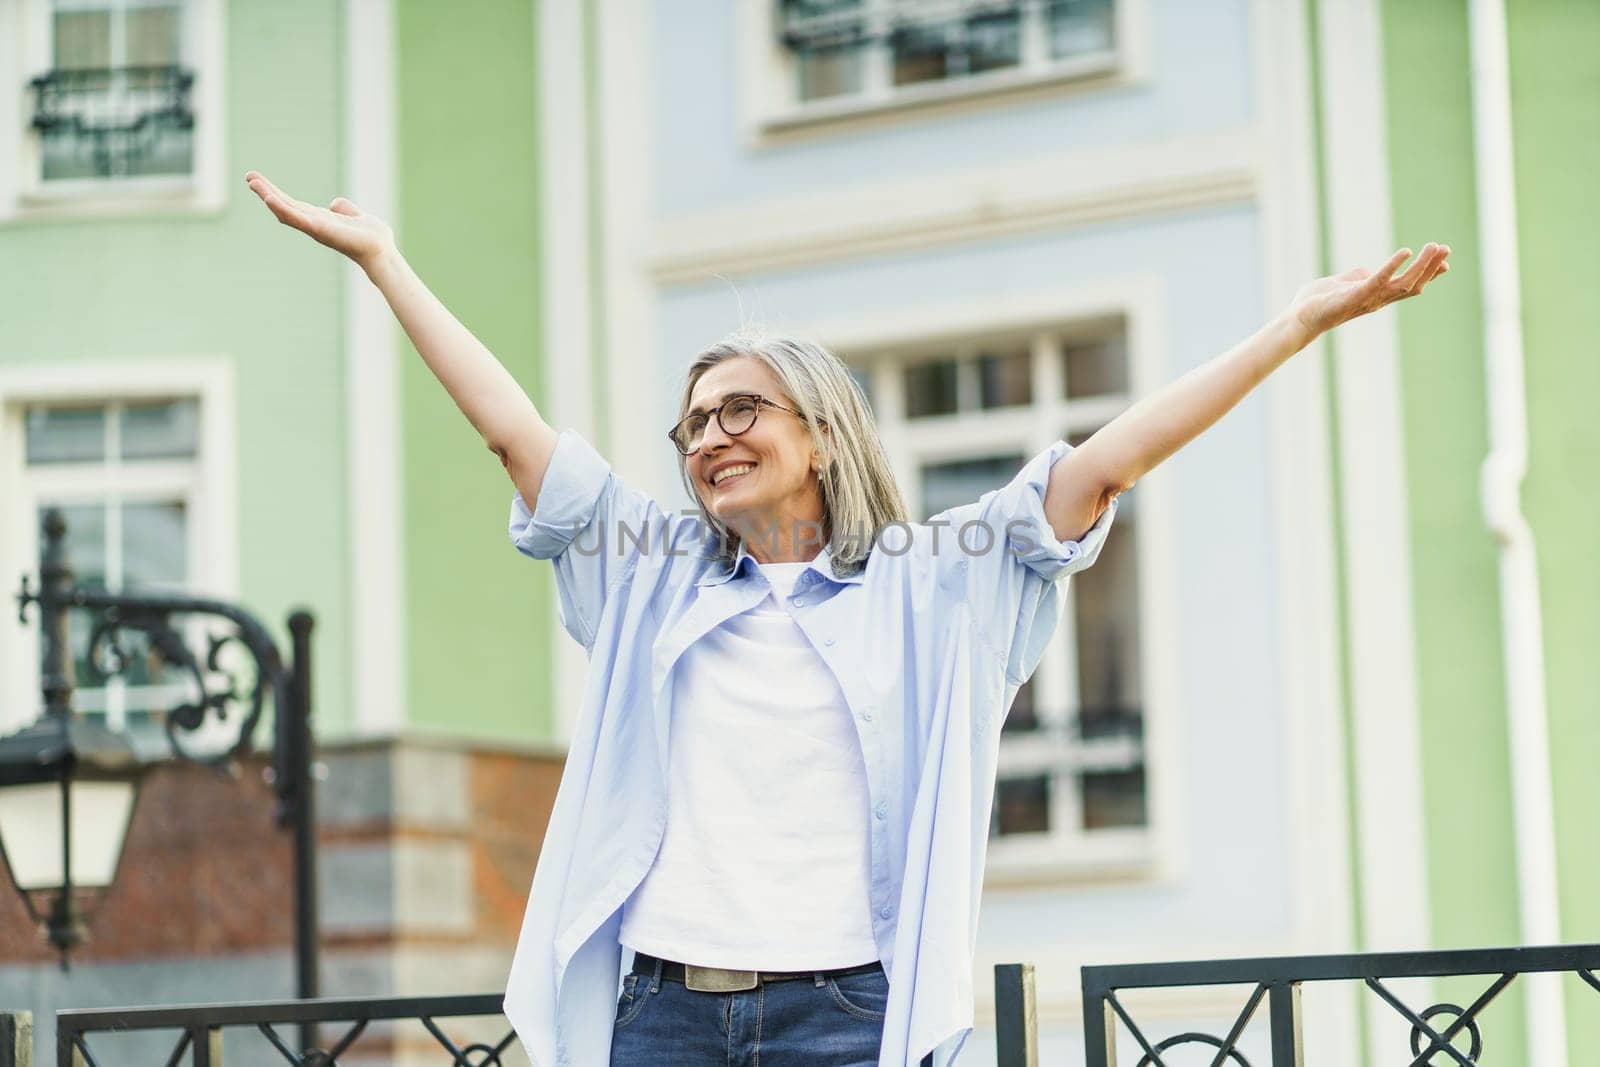 Mature woman standing in old city, smiling and raising her hands to sky, expressing happiness and positive emotions. Perfect illustration of happiness in everyday life and senior living. High quality photo